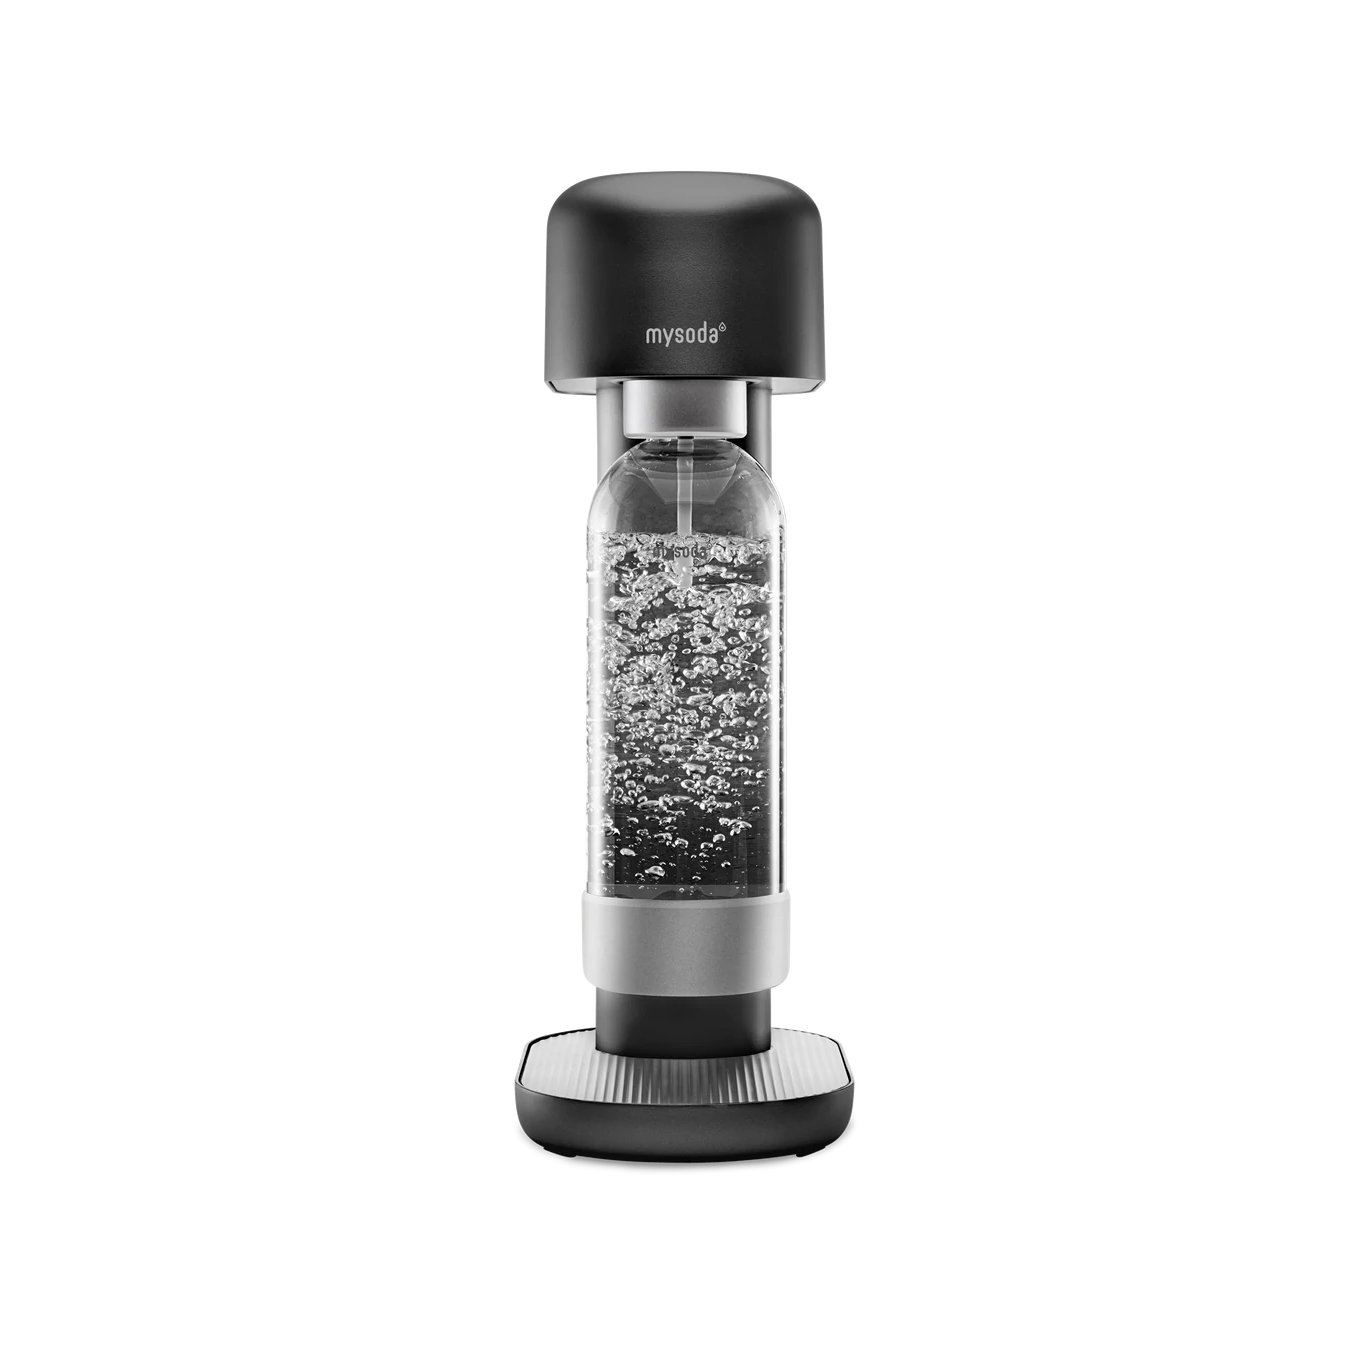 Black Mysoda Ruby sparkling water maker viewed from the front